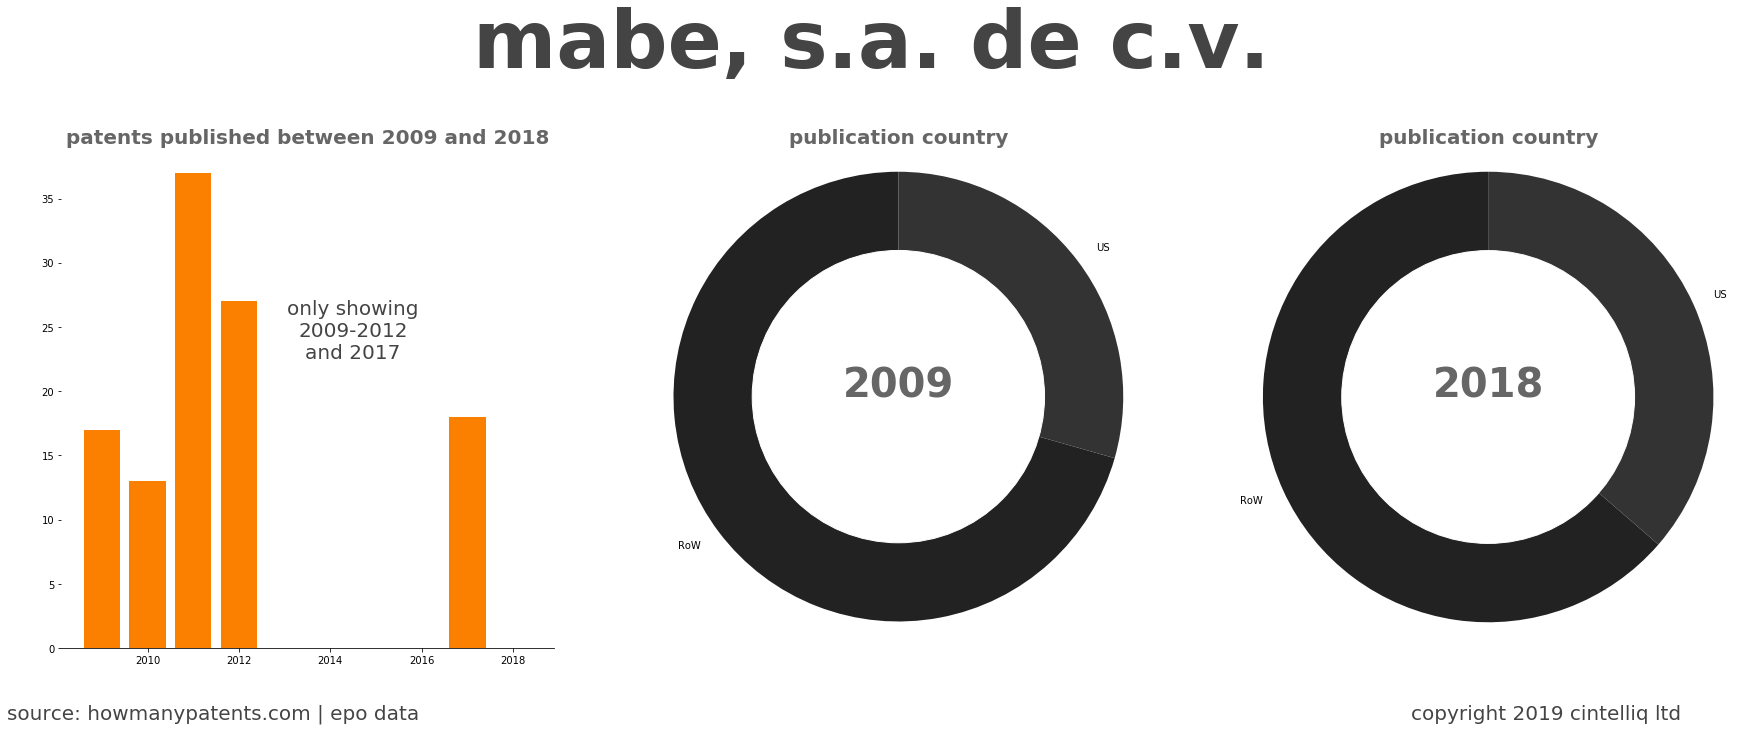 summary of patents for Mabe, S.A. De C.V.